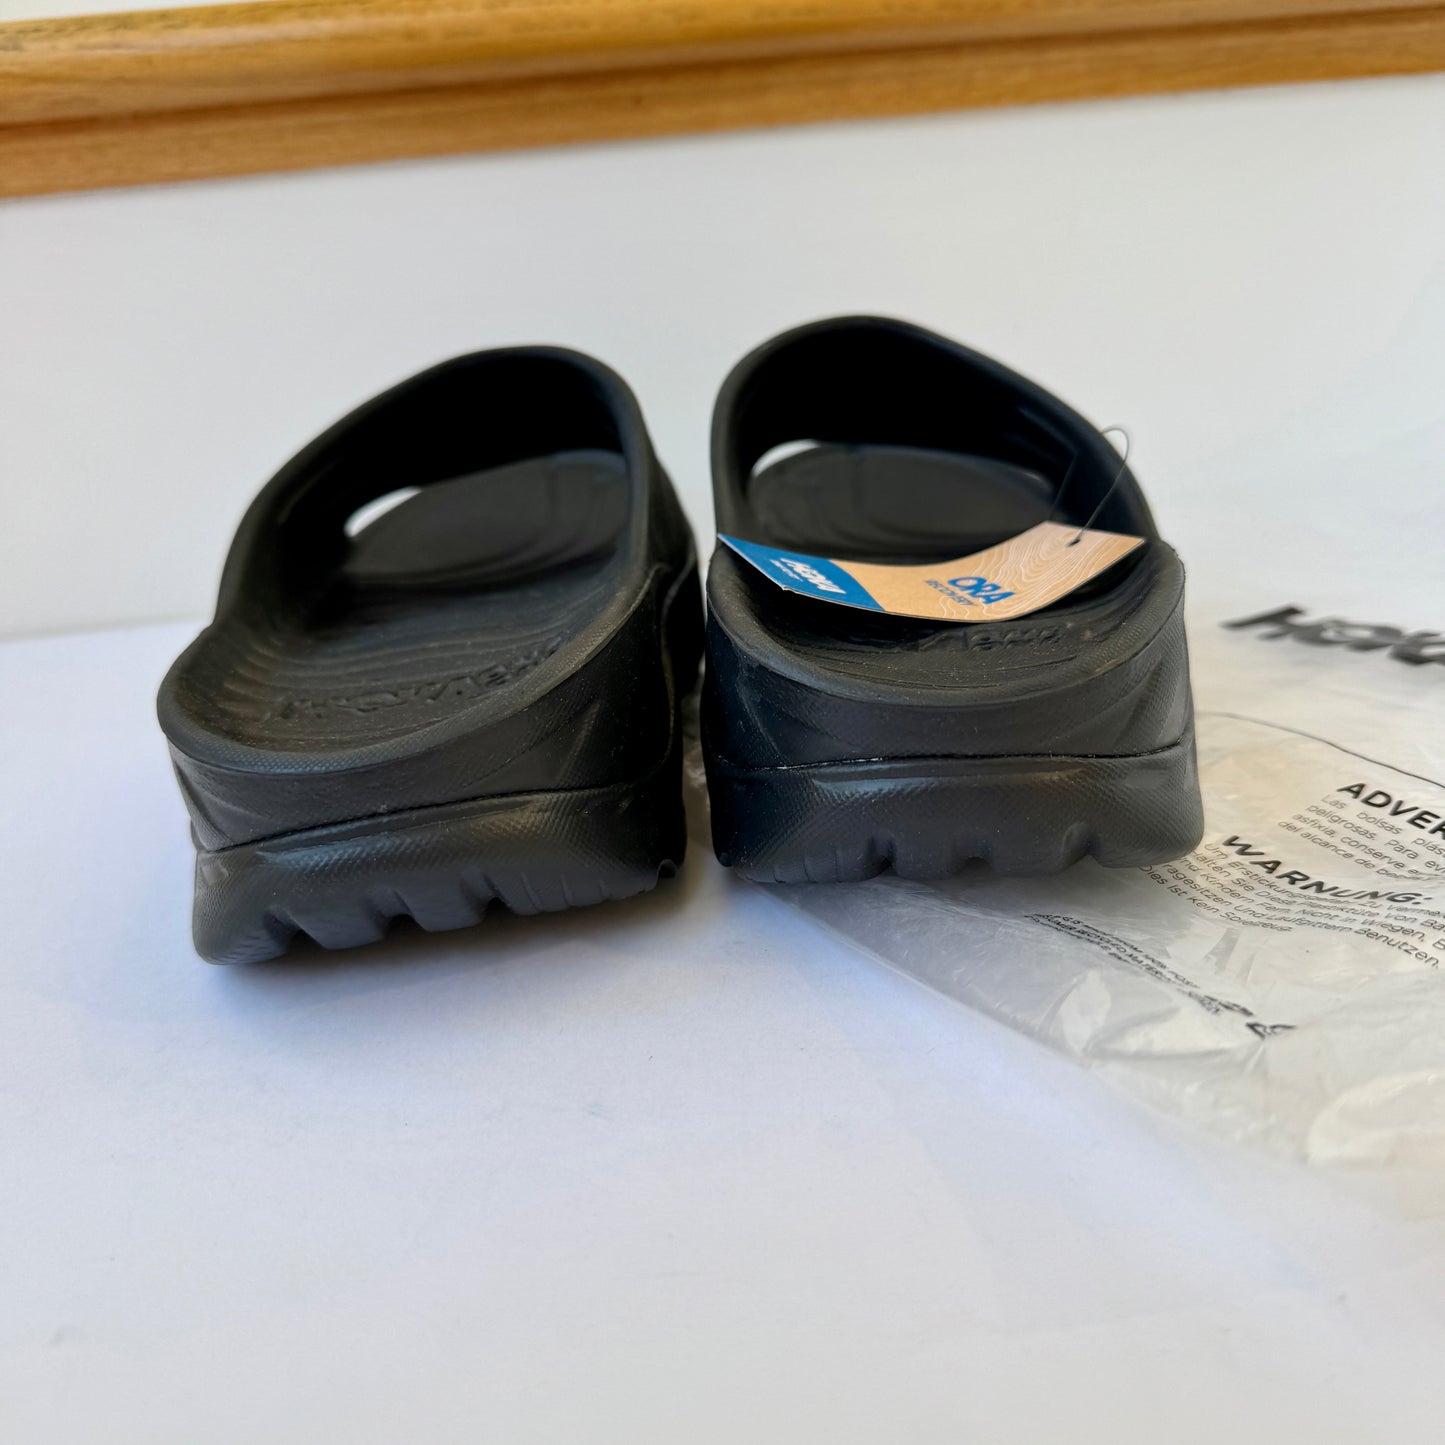 Hoka Ora Slides Women’s Recovery Sandals in all black , original style / version